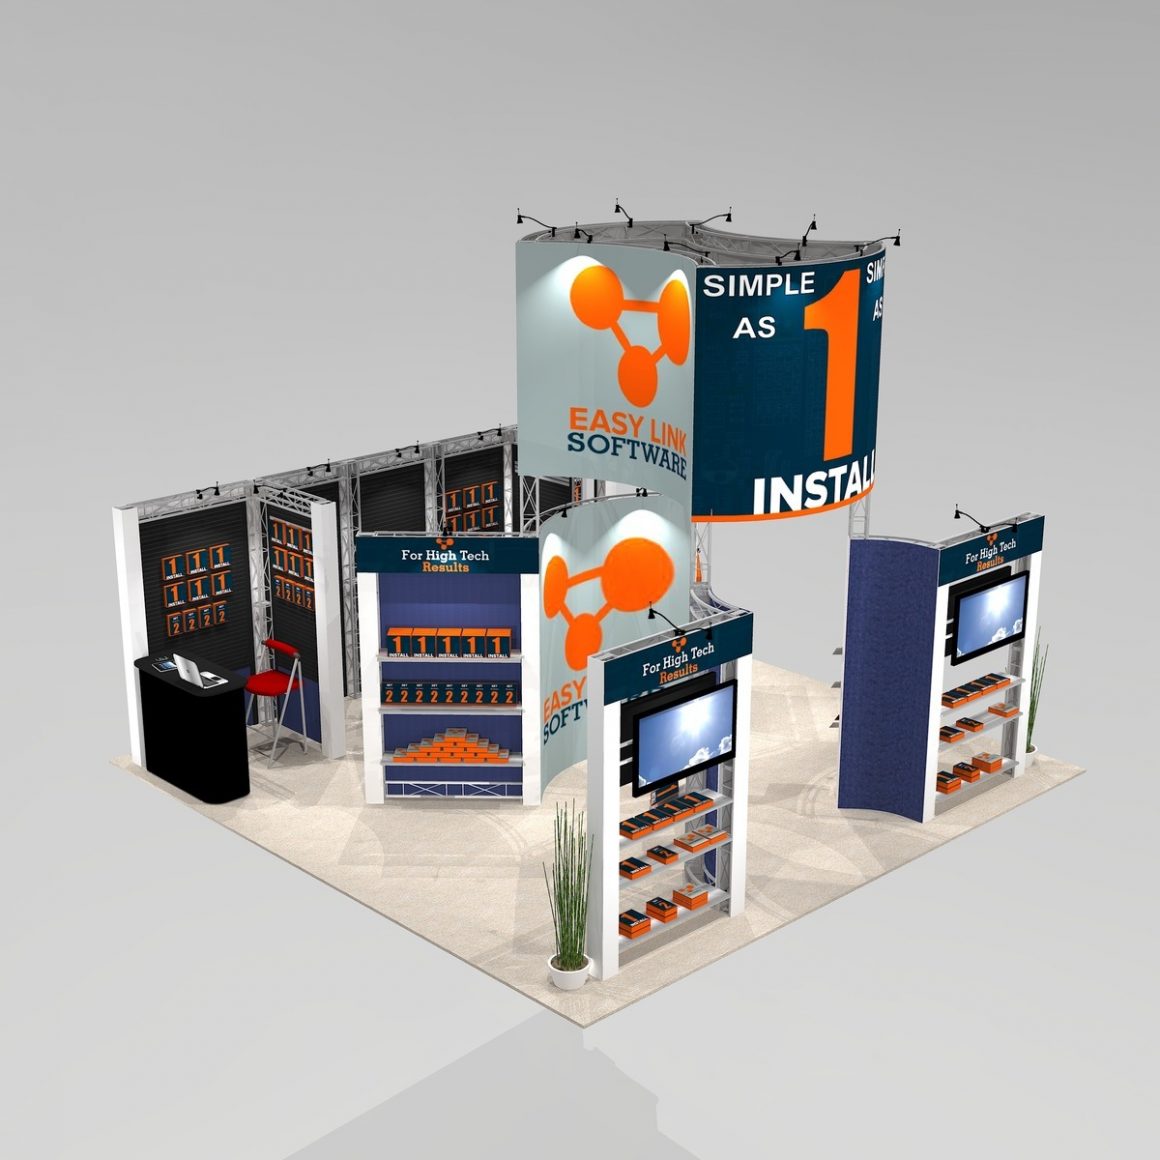 Merchandise and meeting trade show exhibit design BIG2020 Graphic Package A